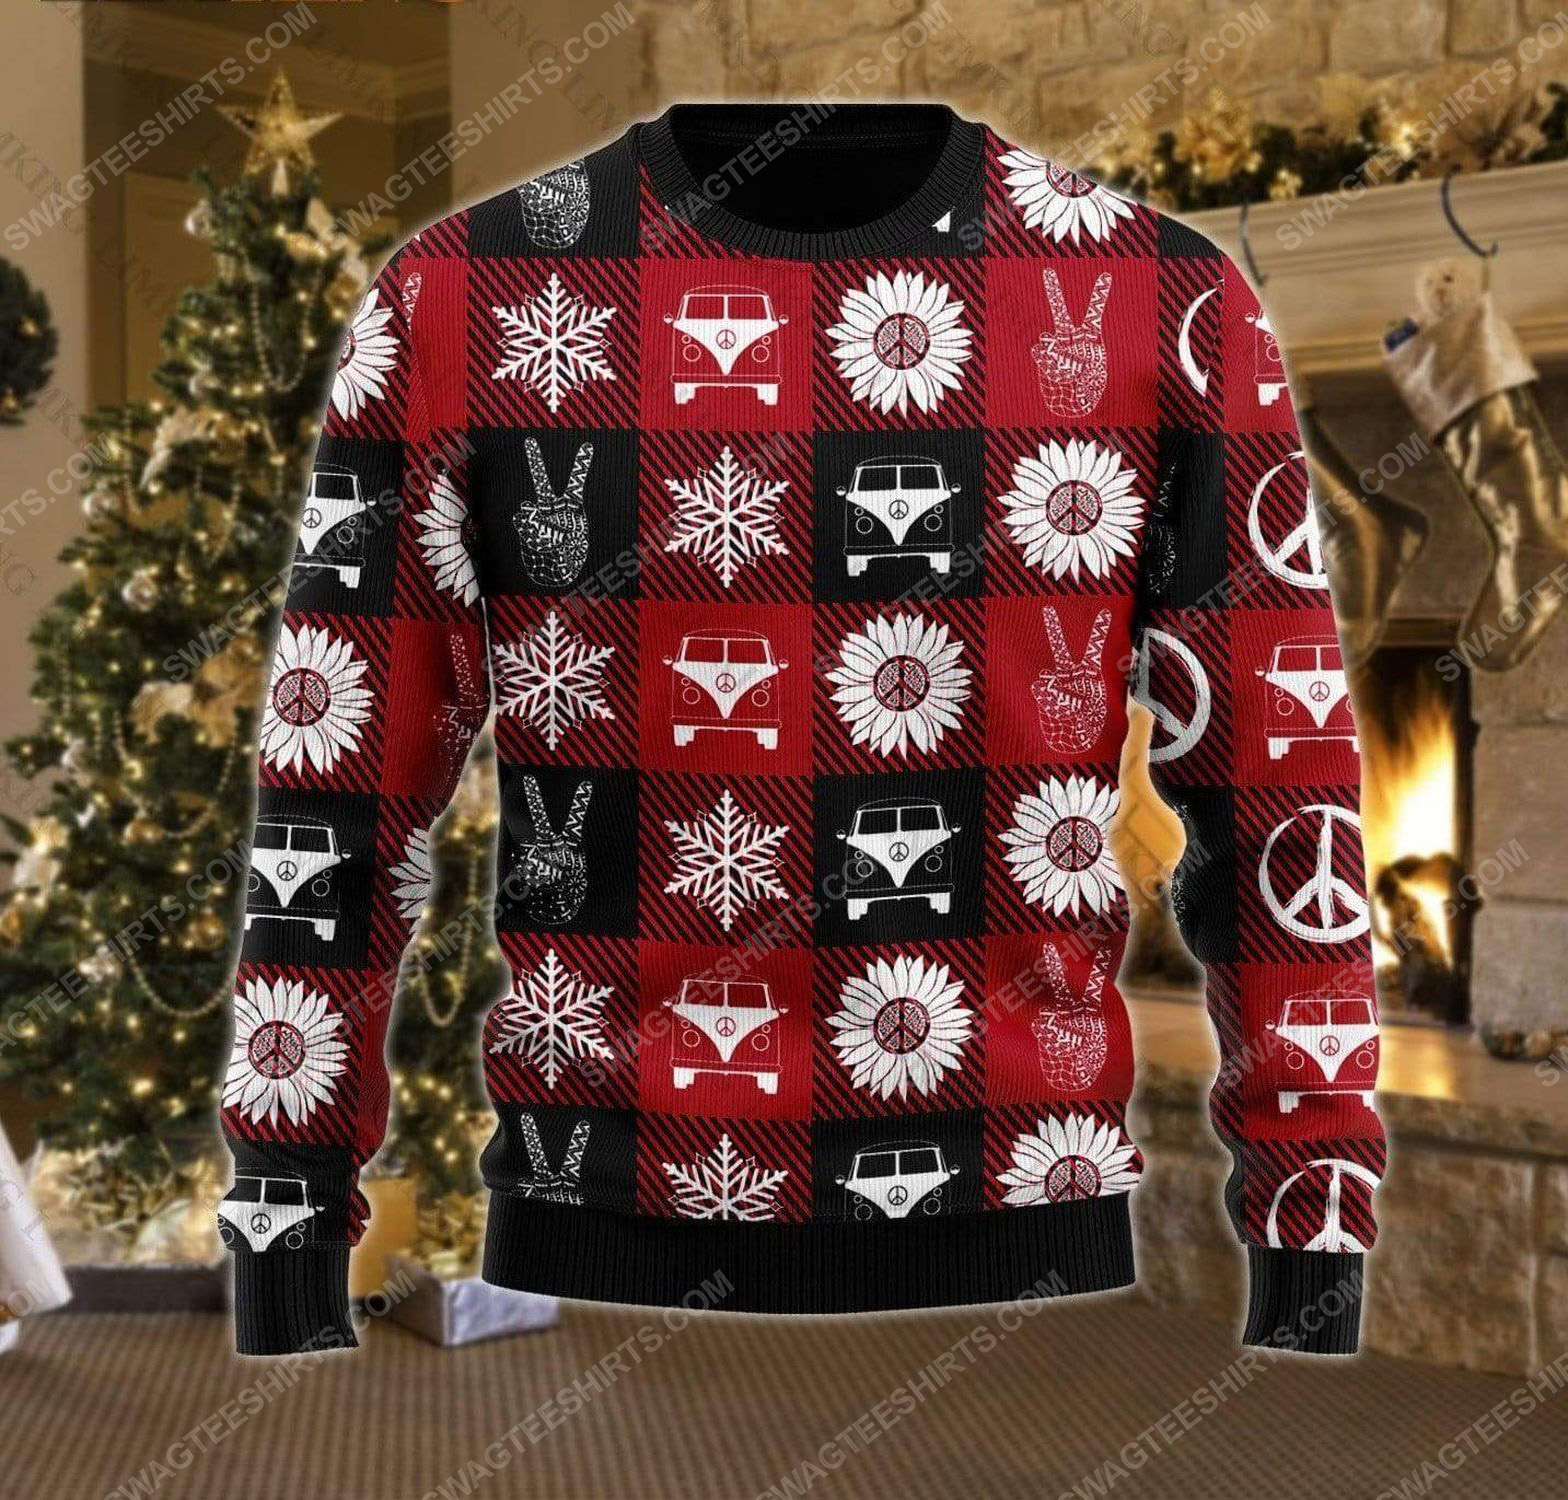 Hippie peace love ugly christmas sweater 2 - Copy